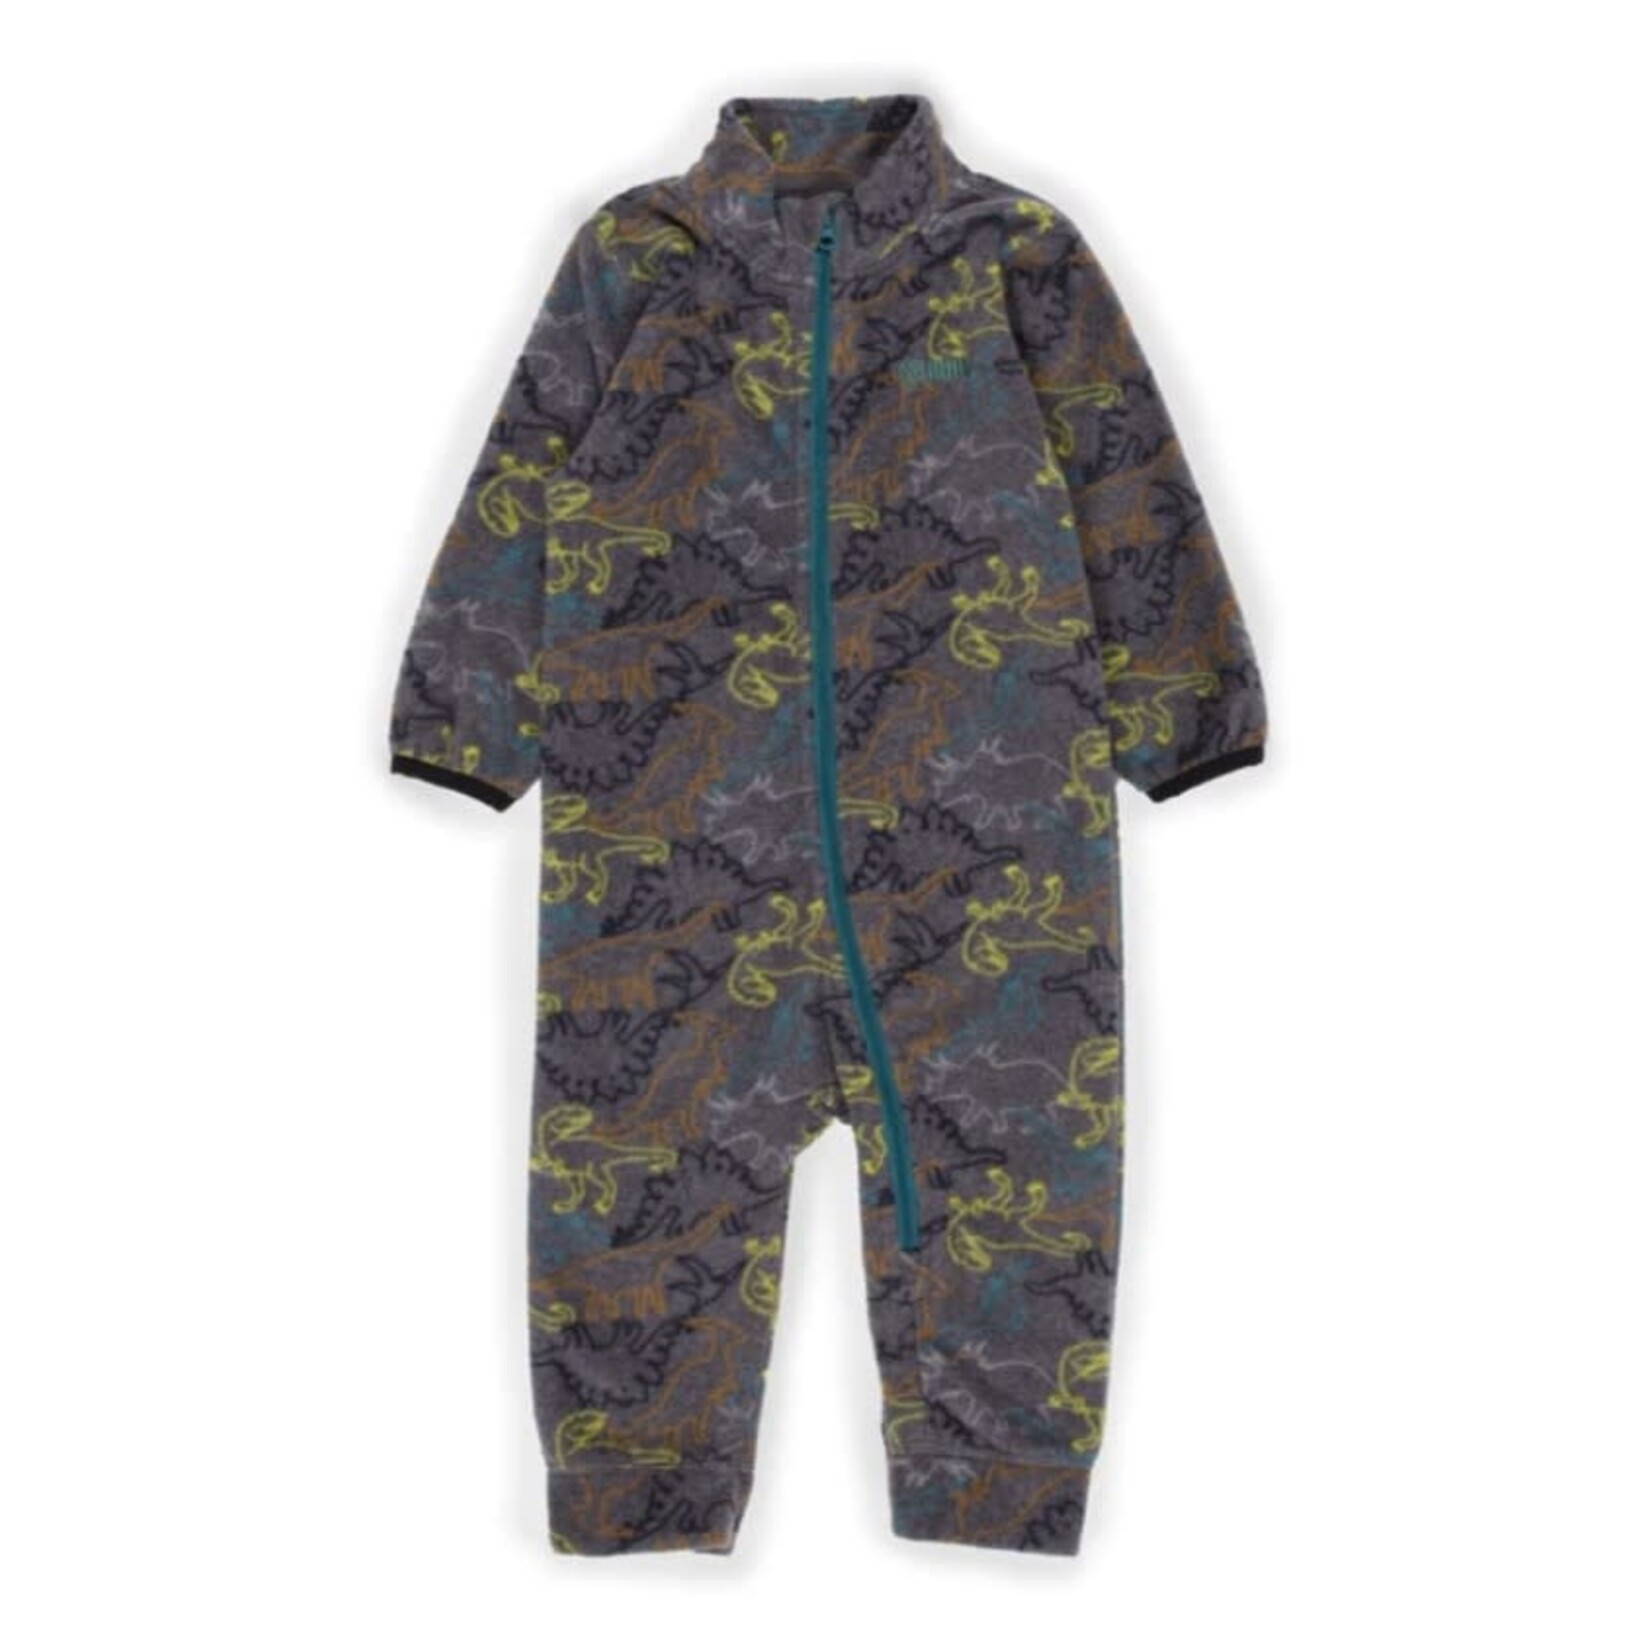 Nanö NANÖ -  One piece microfleece romper - Grey with dinosaure silhouettes